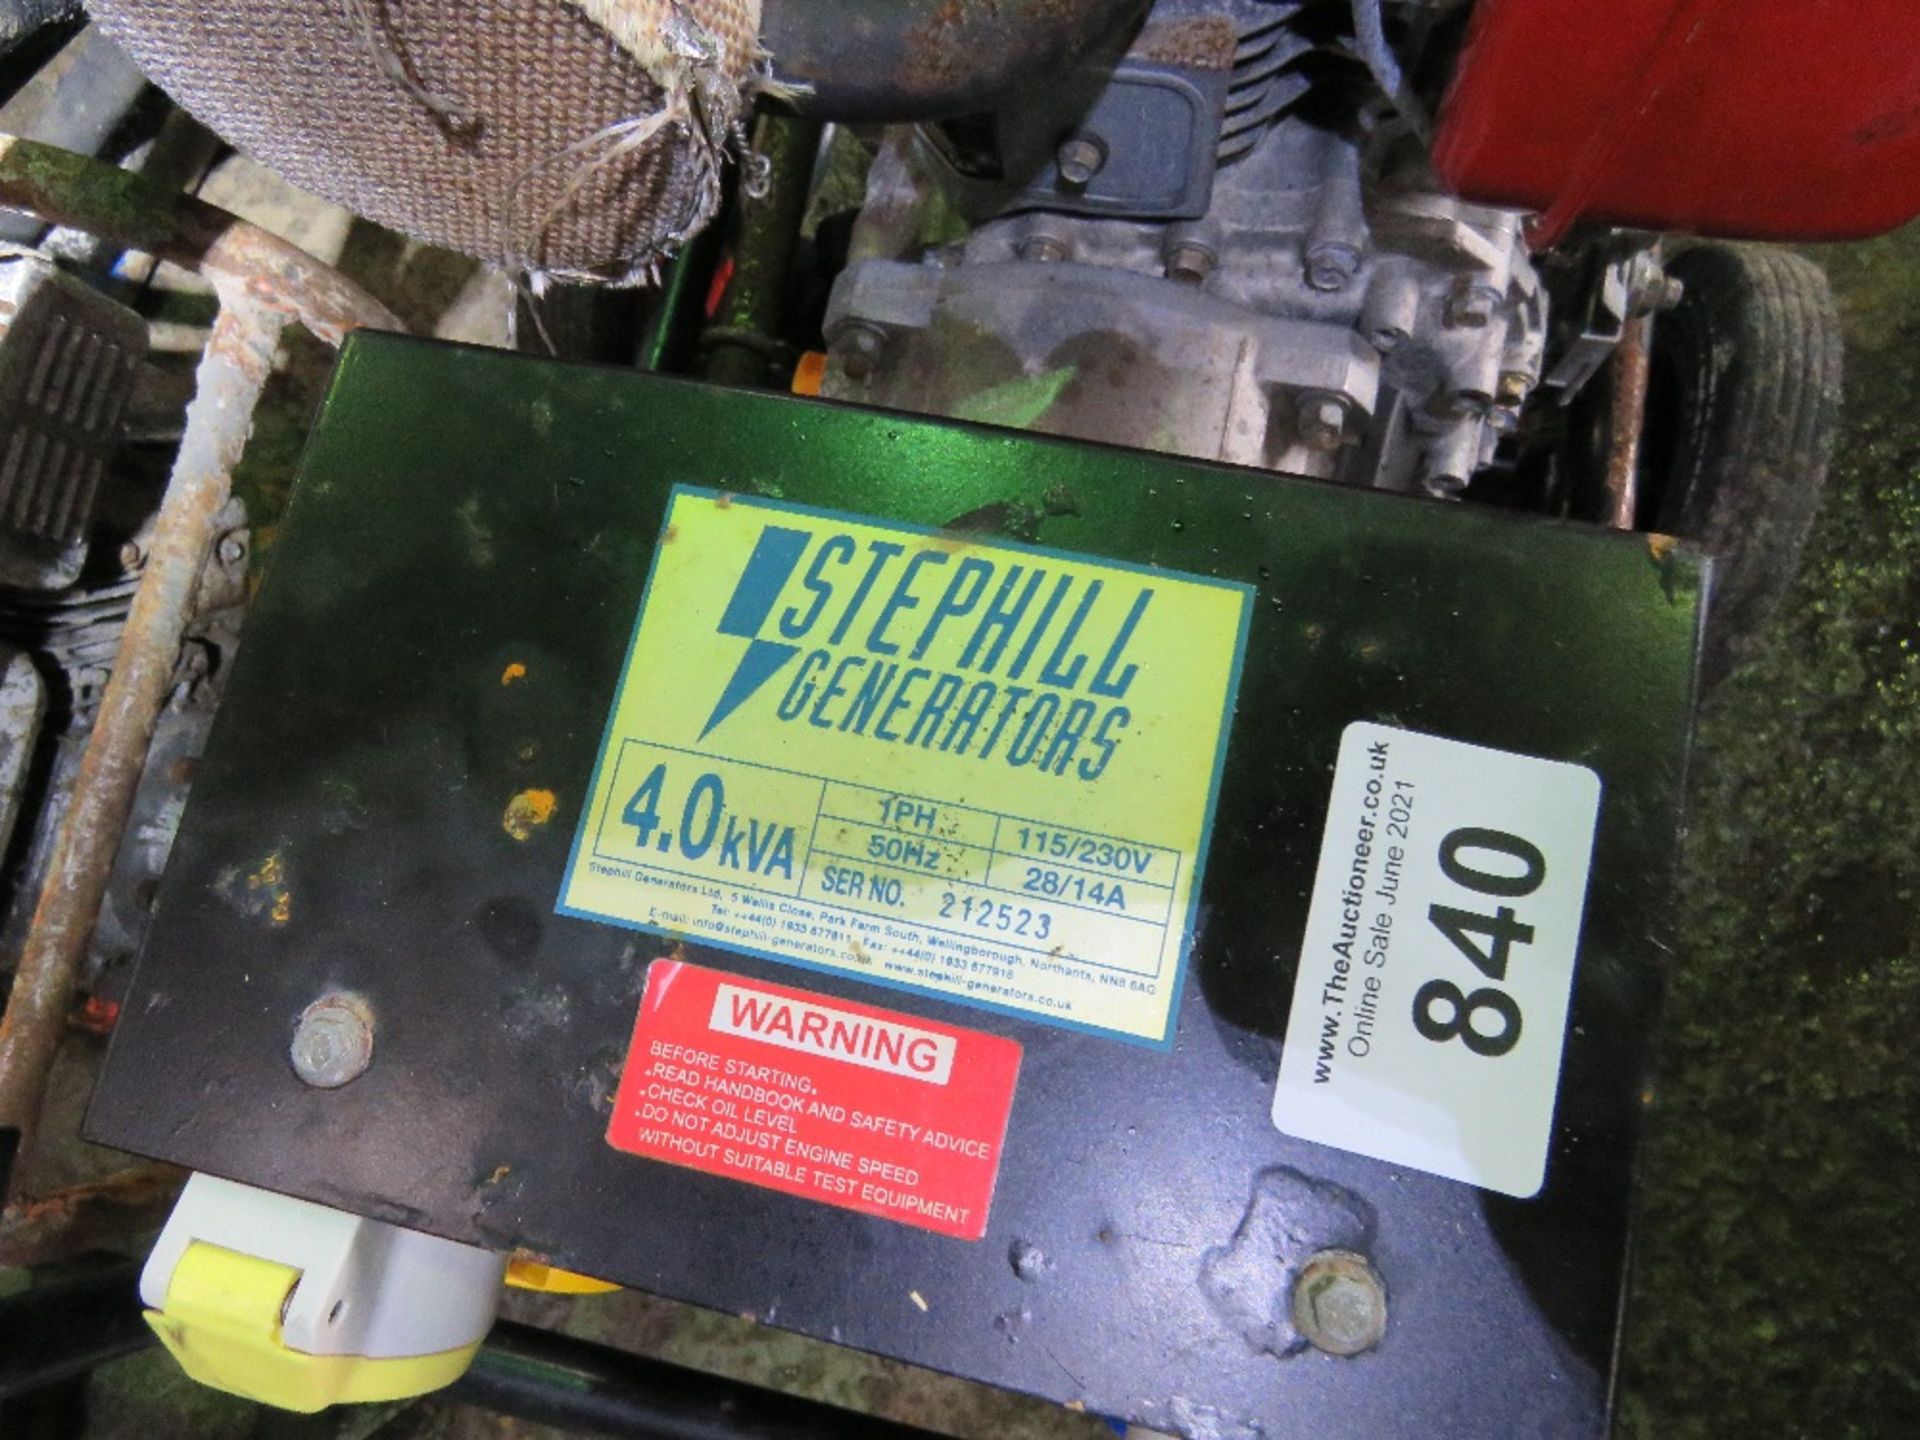 YANMAR STEPHILL DIESEL GENERATOR. UNTESTED, CONDITION UNKNOWN. - Image 2 of 4